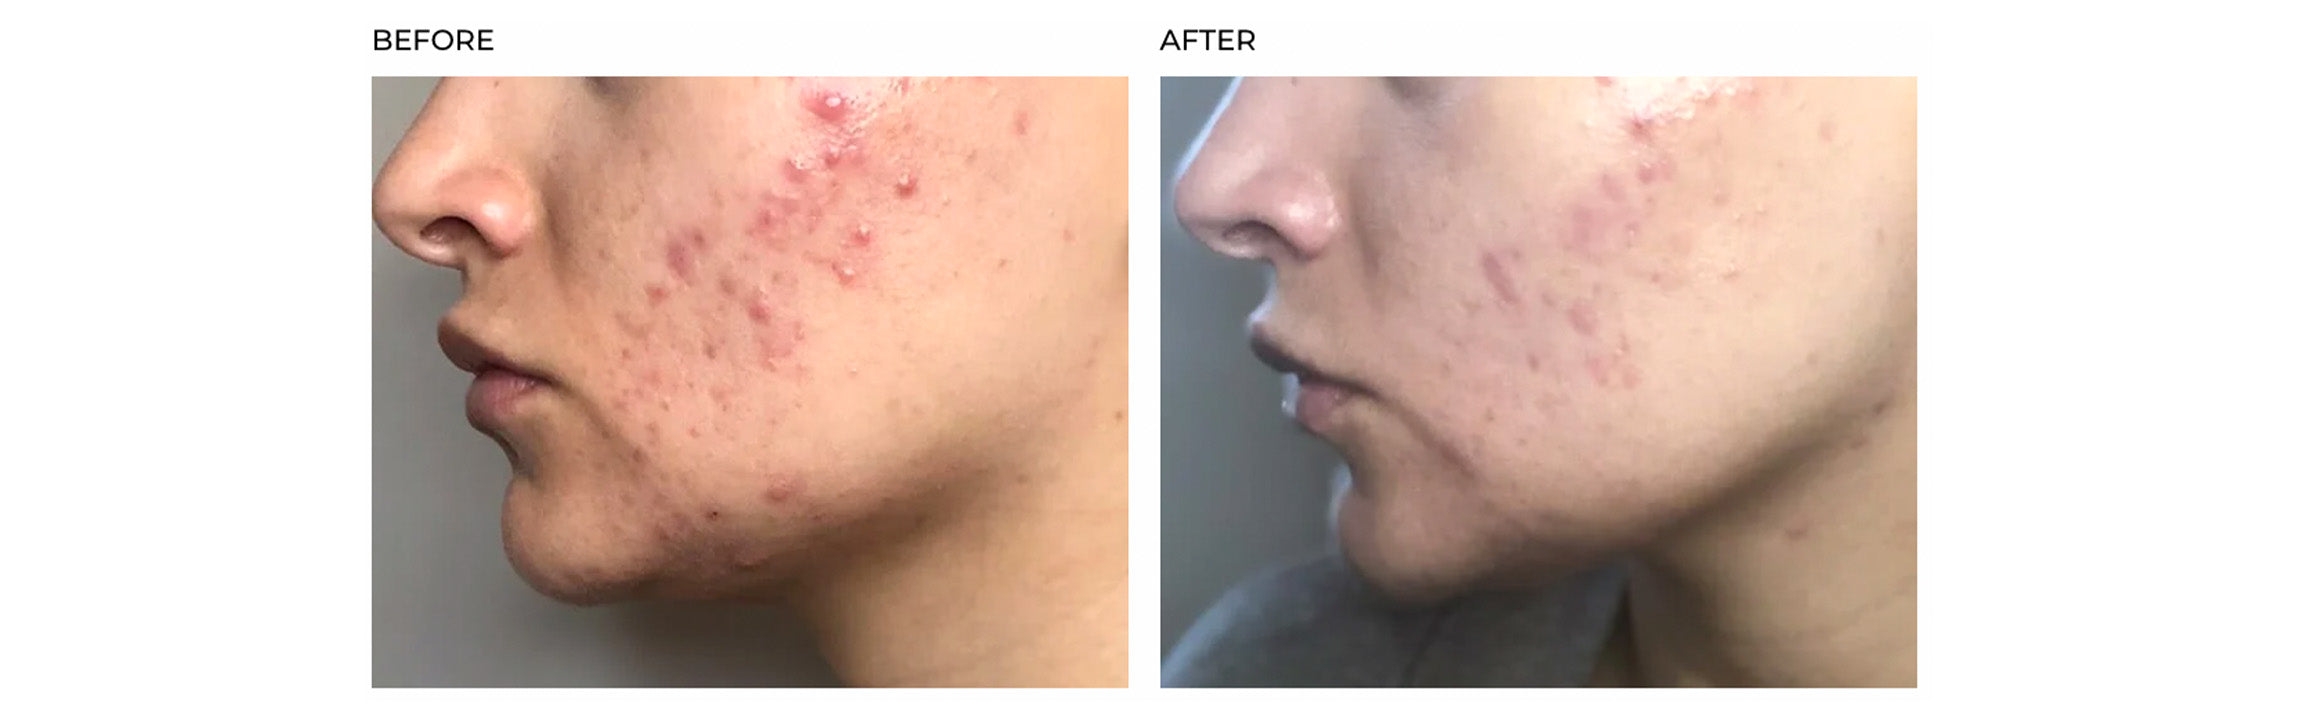 SkinCapsule Clear+ acne results acne before & after